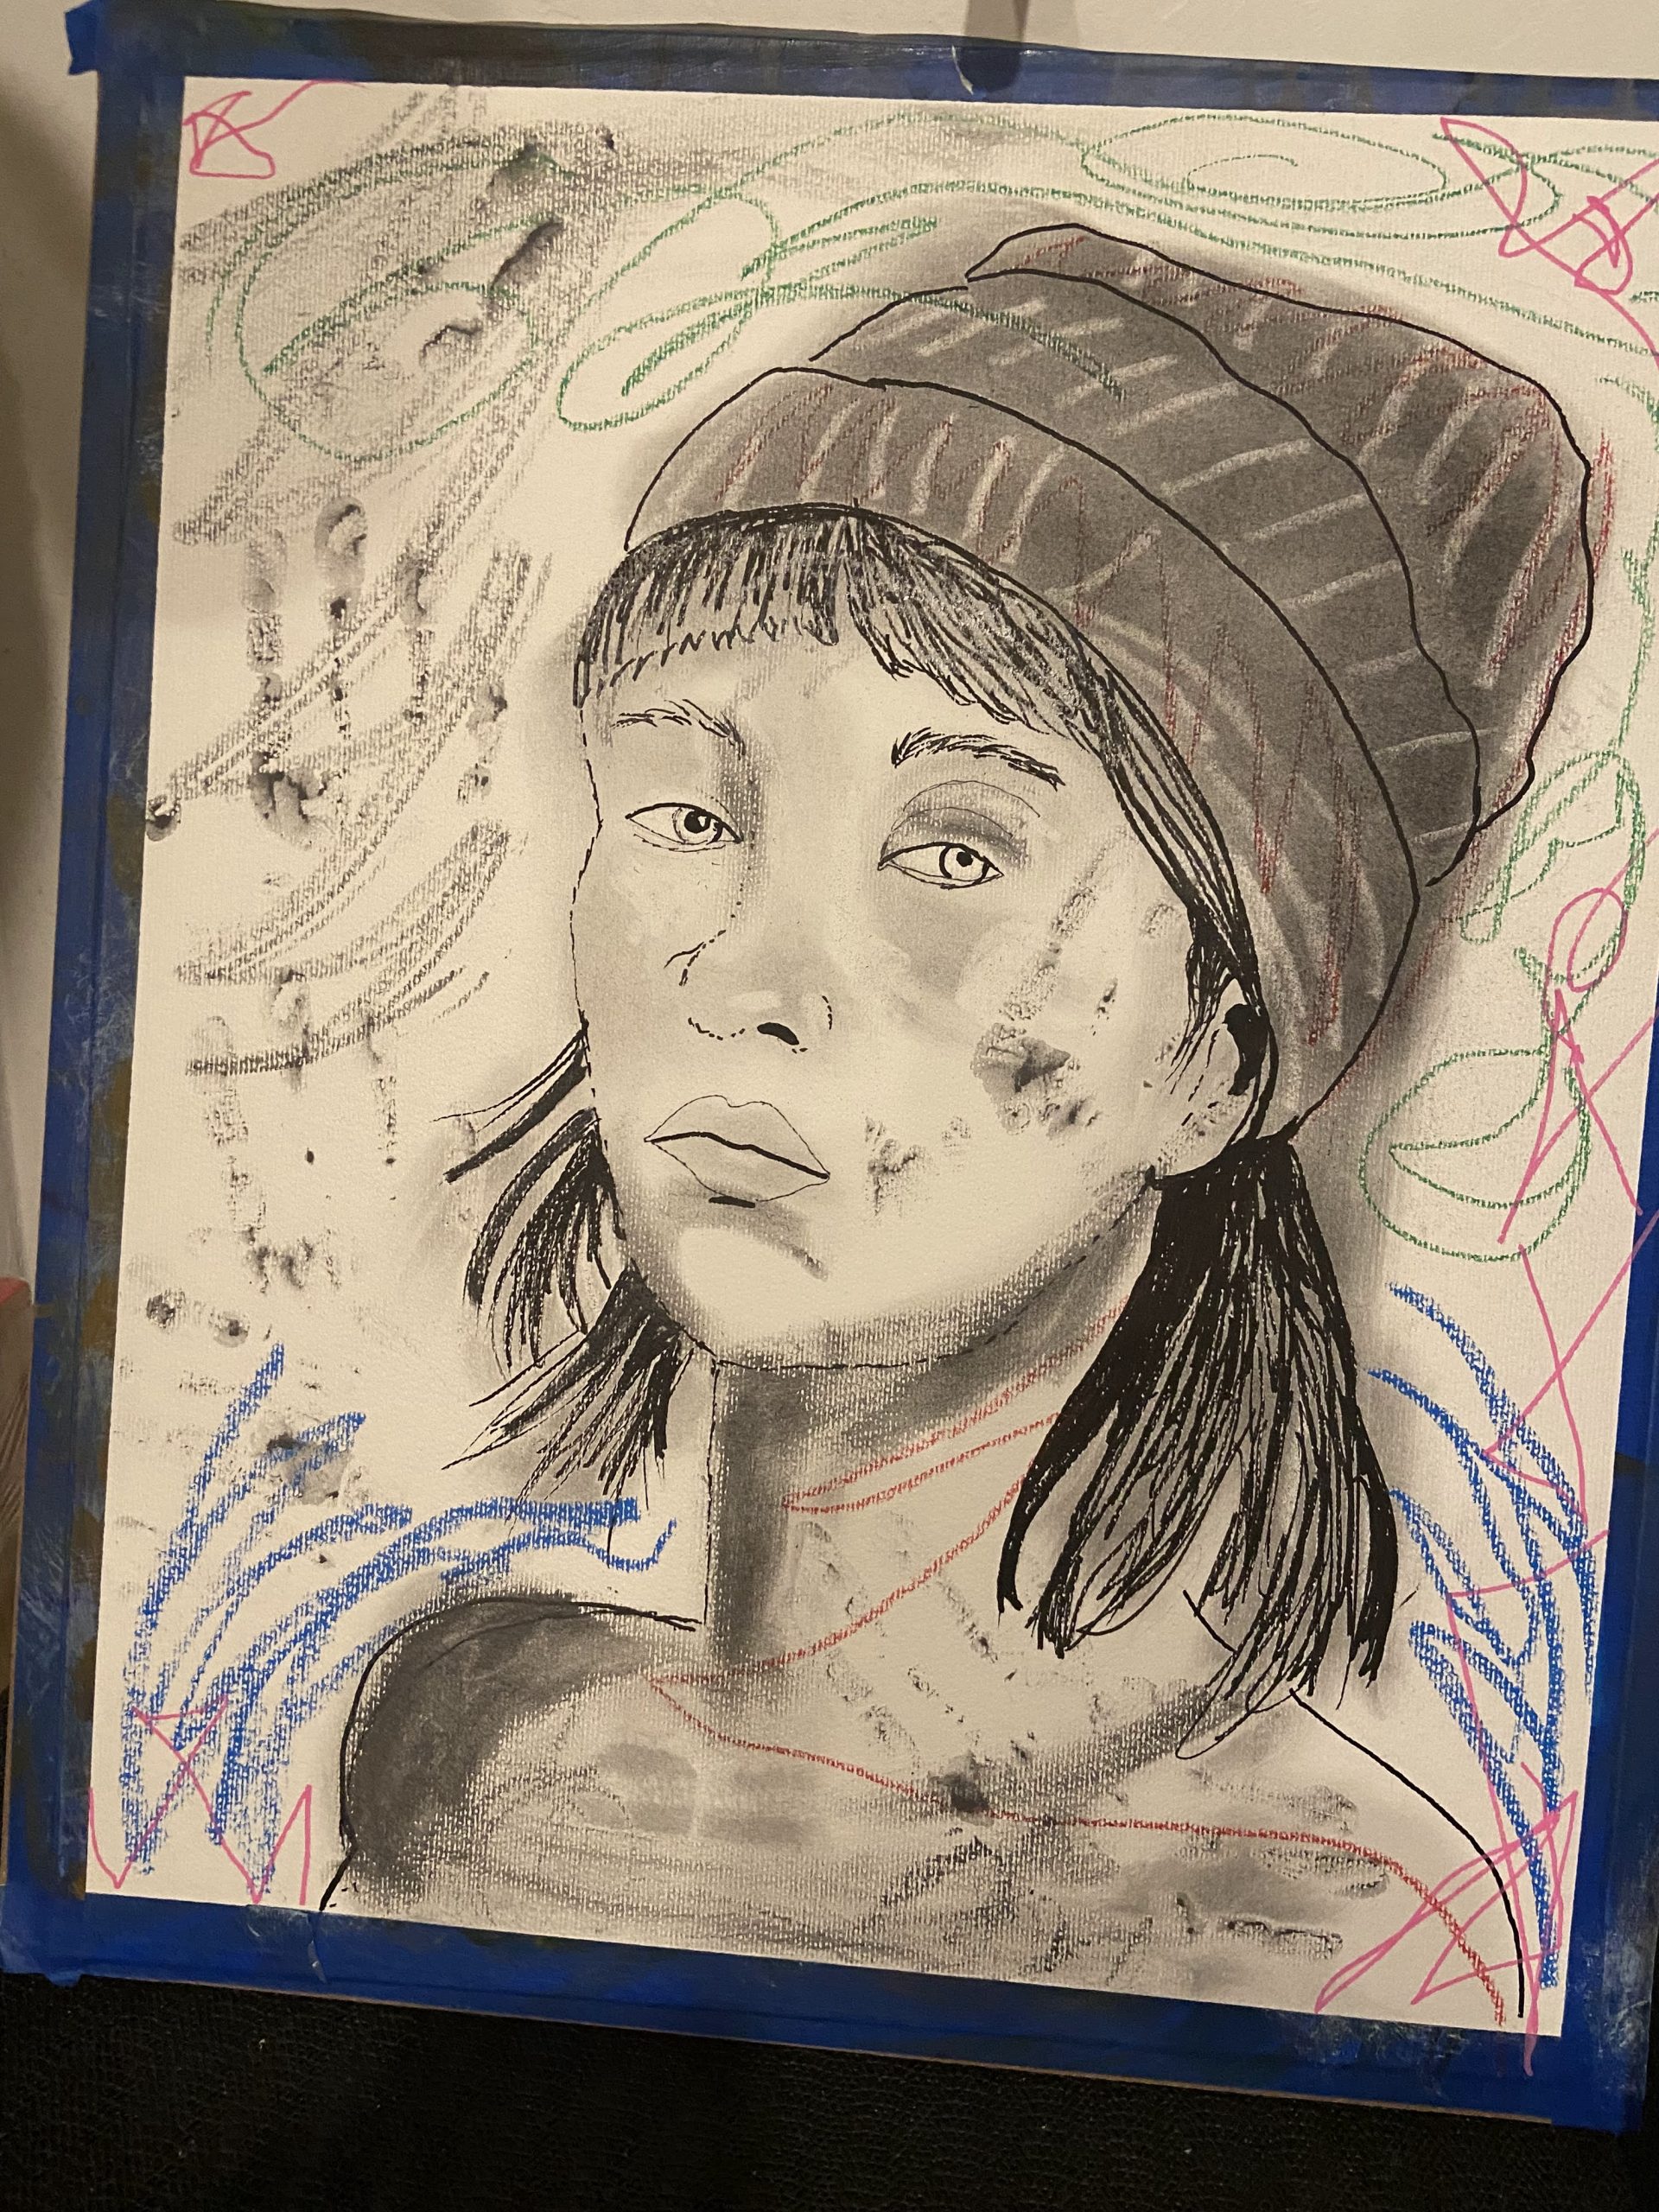 Drawing of a girl with a knit hat embellished with mark-making